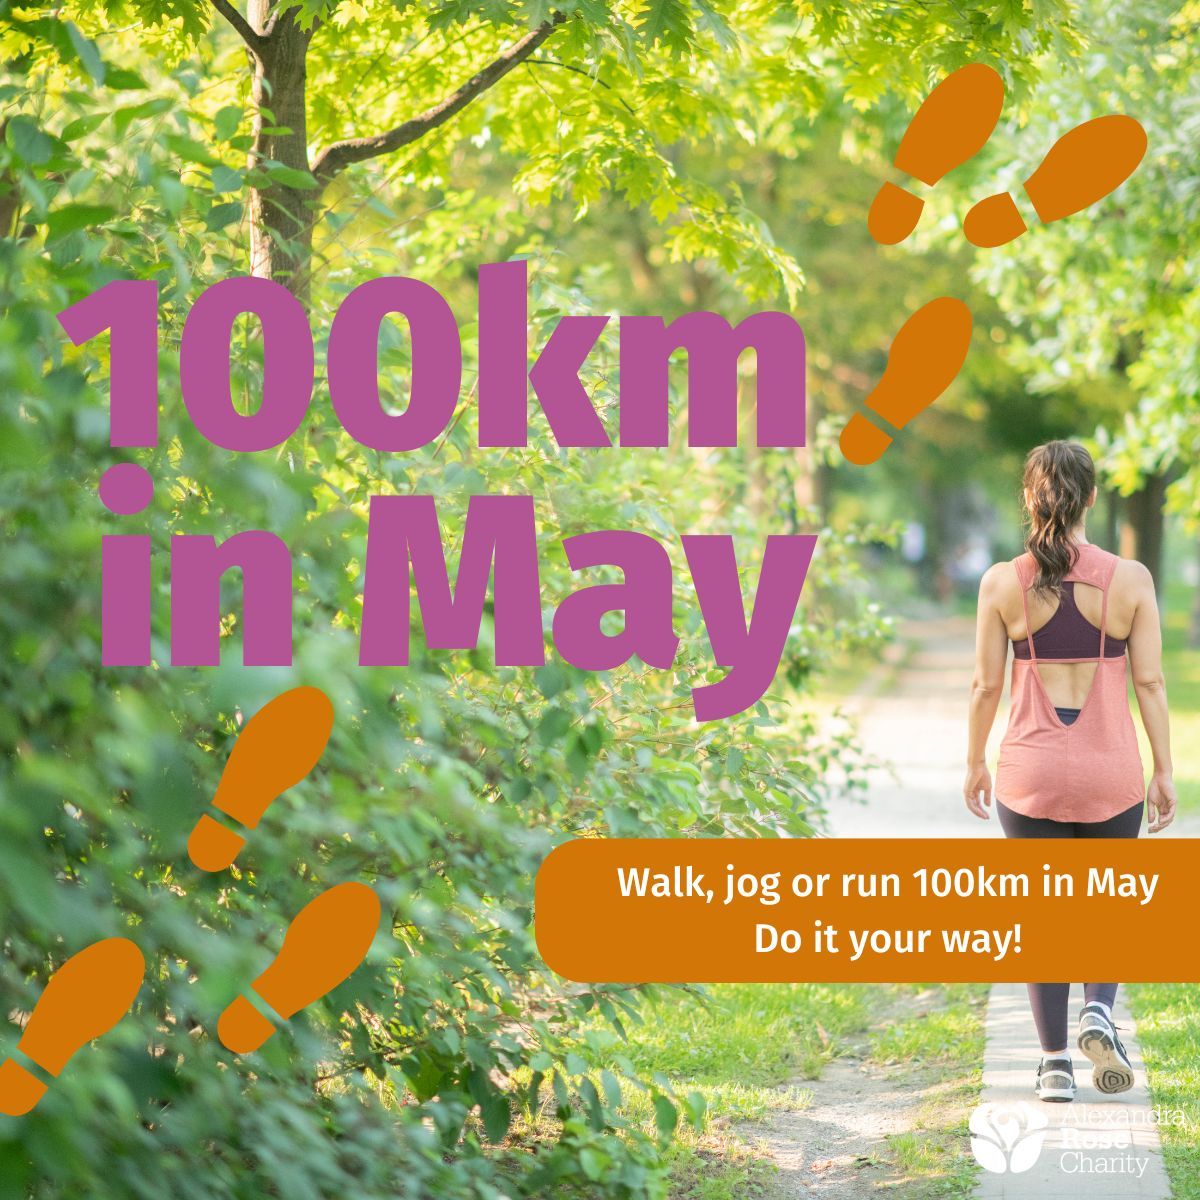 We’re challenging you to complete 100km in May. Every step you take and every single pound you raise will make a difference. If you’re up for the 100km in May challenge, please email Eloise at fundraising@alexandrarose.org.uk and she’ll send out your challenge pack via email.